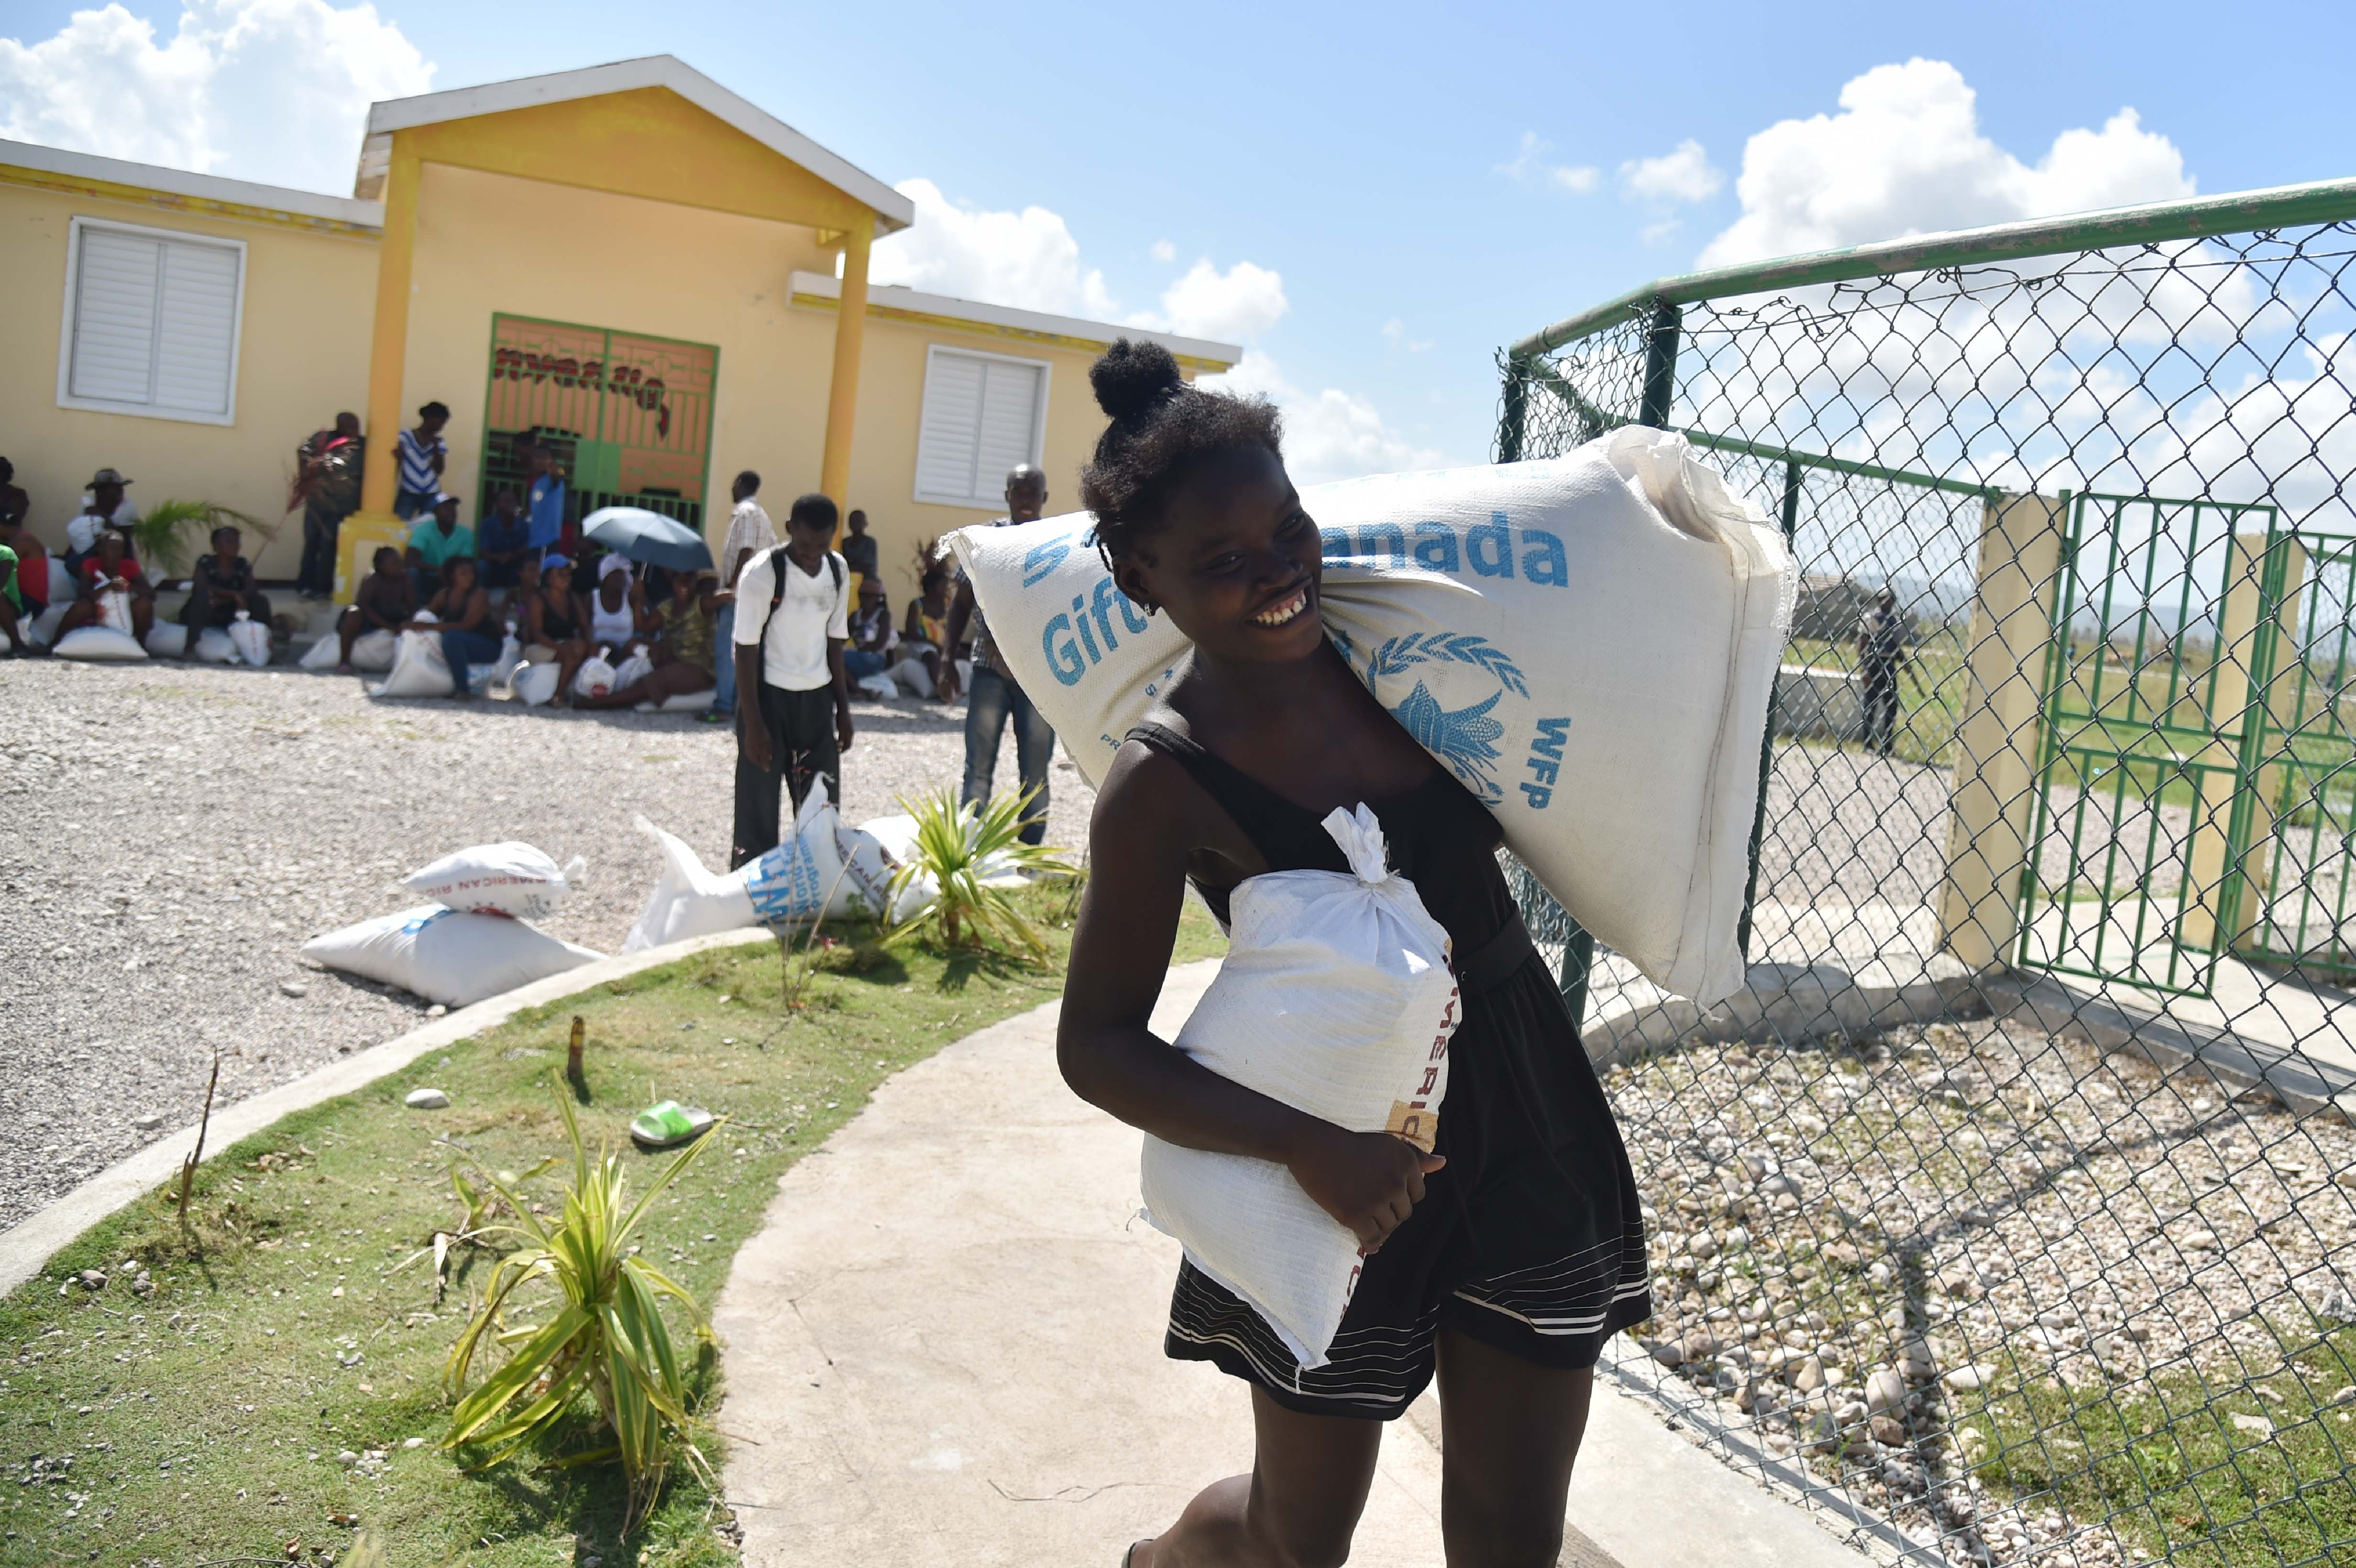 Haiti Is Picking Up The Pieces After Its Second Natural Disaster In Less Than A Decade
